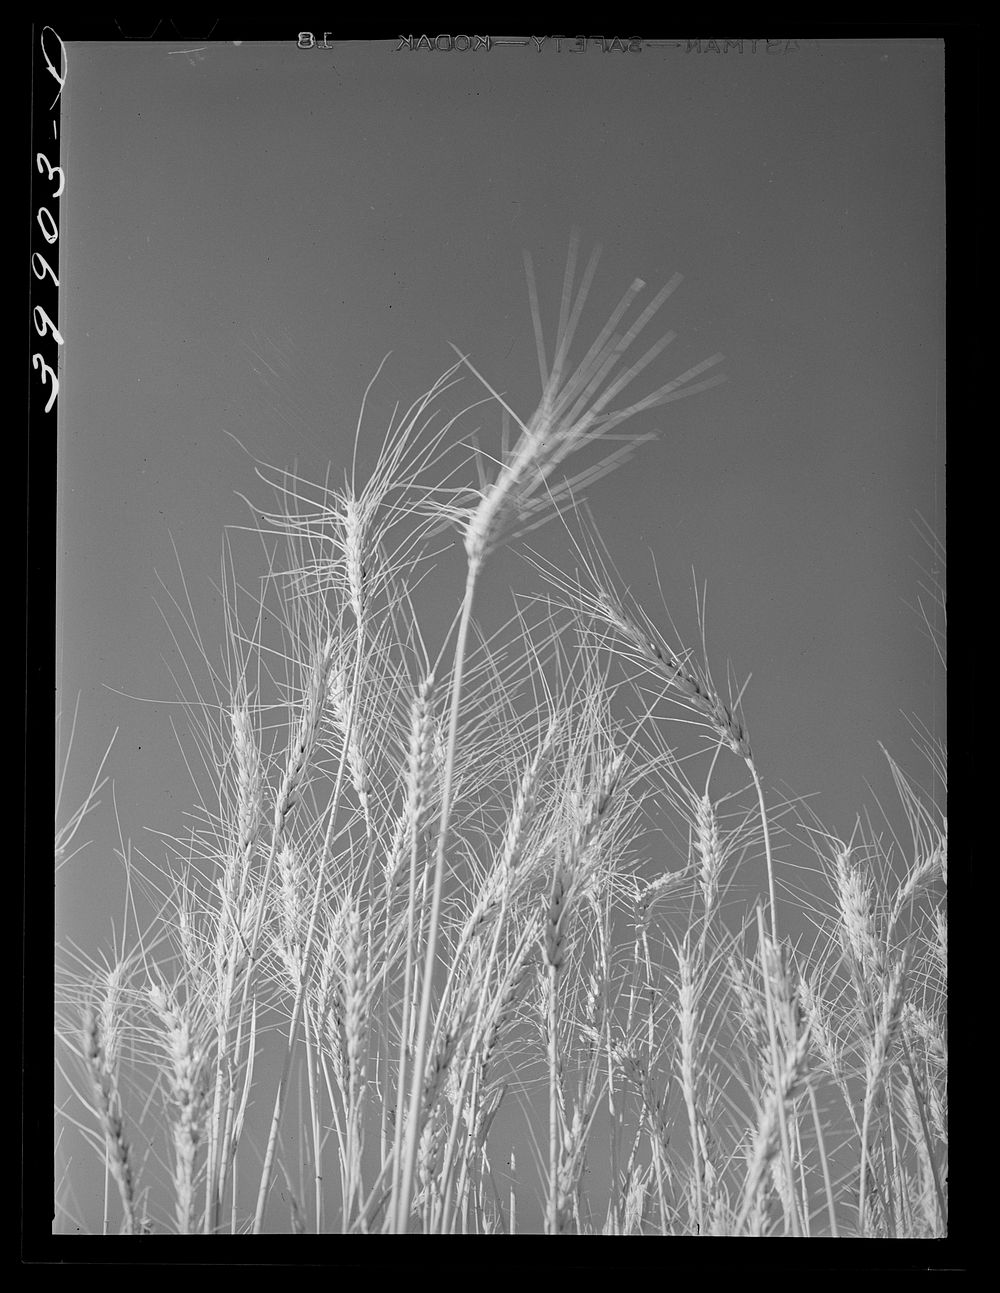 [Untitled photo, possibly related to: Ripe wheat in the field. Eureka Flats, Walla Walla, Washington] by Russell Lee